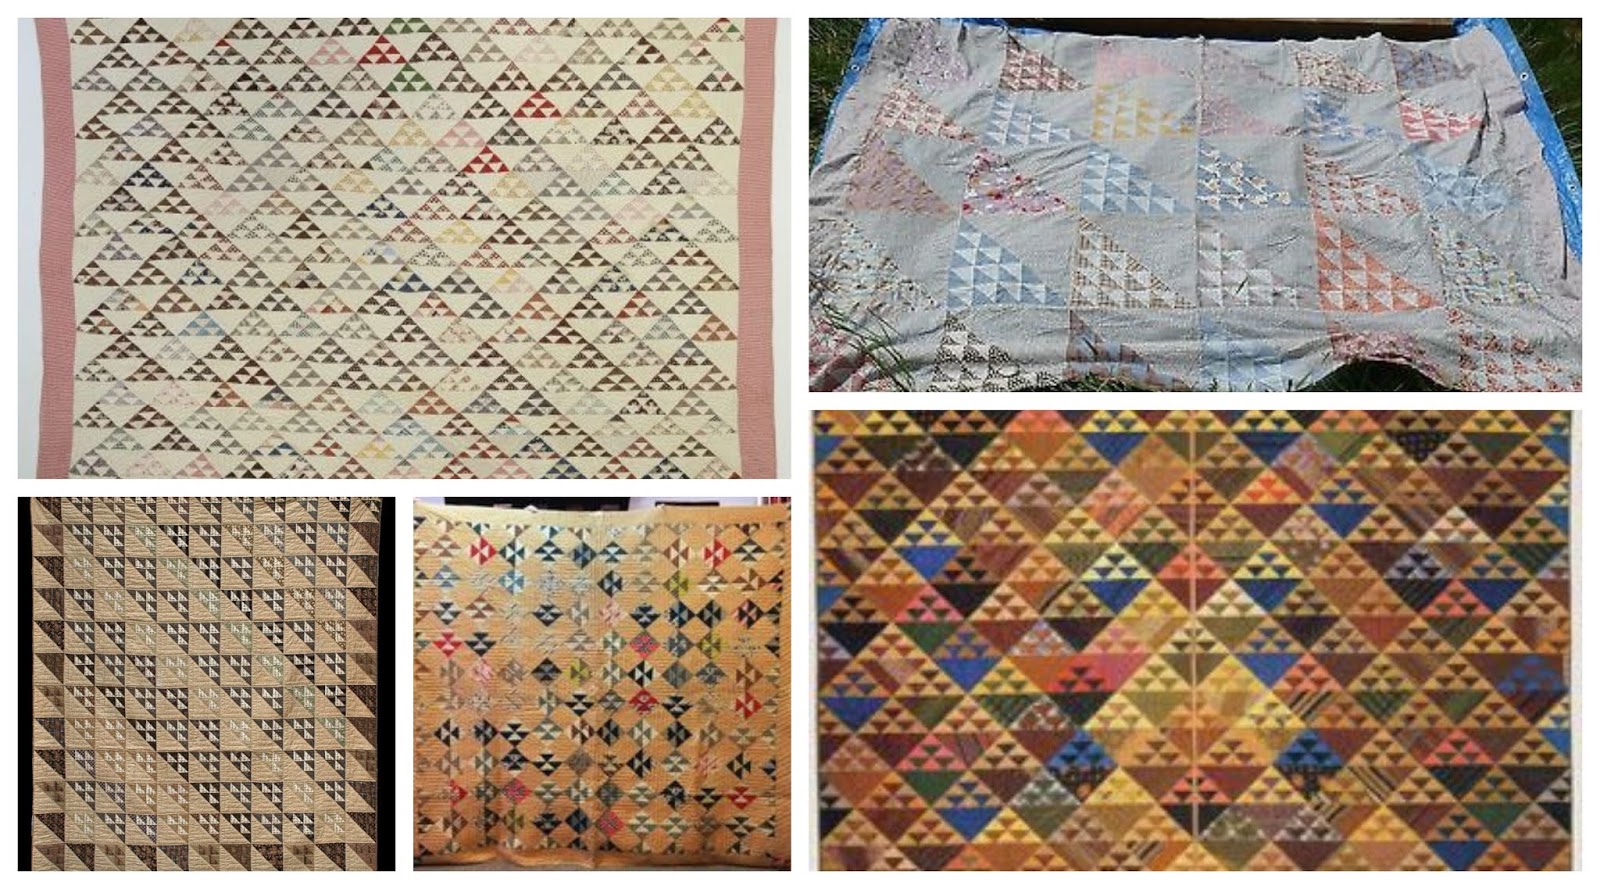 Classic Quilt Blocks} Birds In The Air - An Introduction <img src